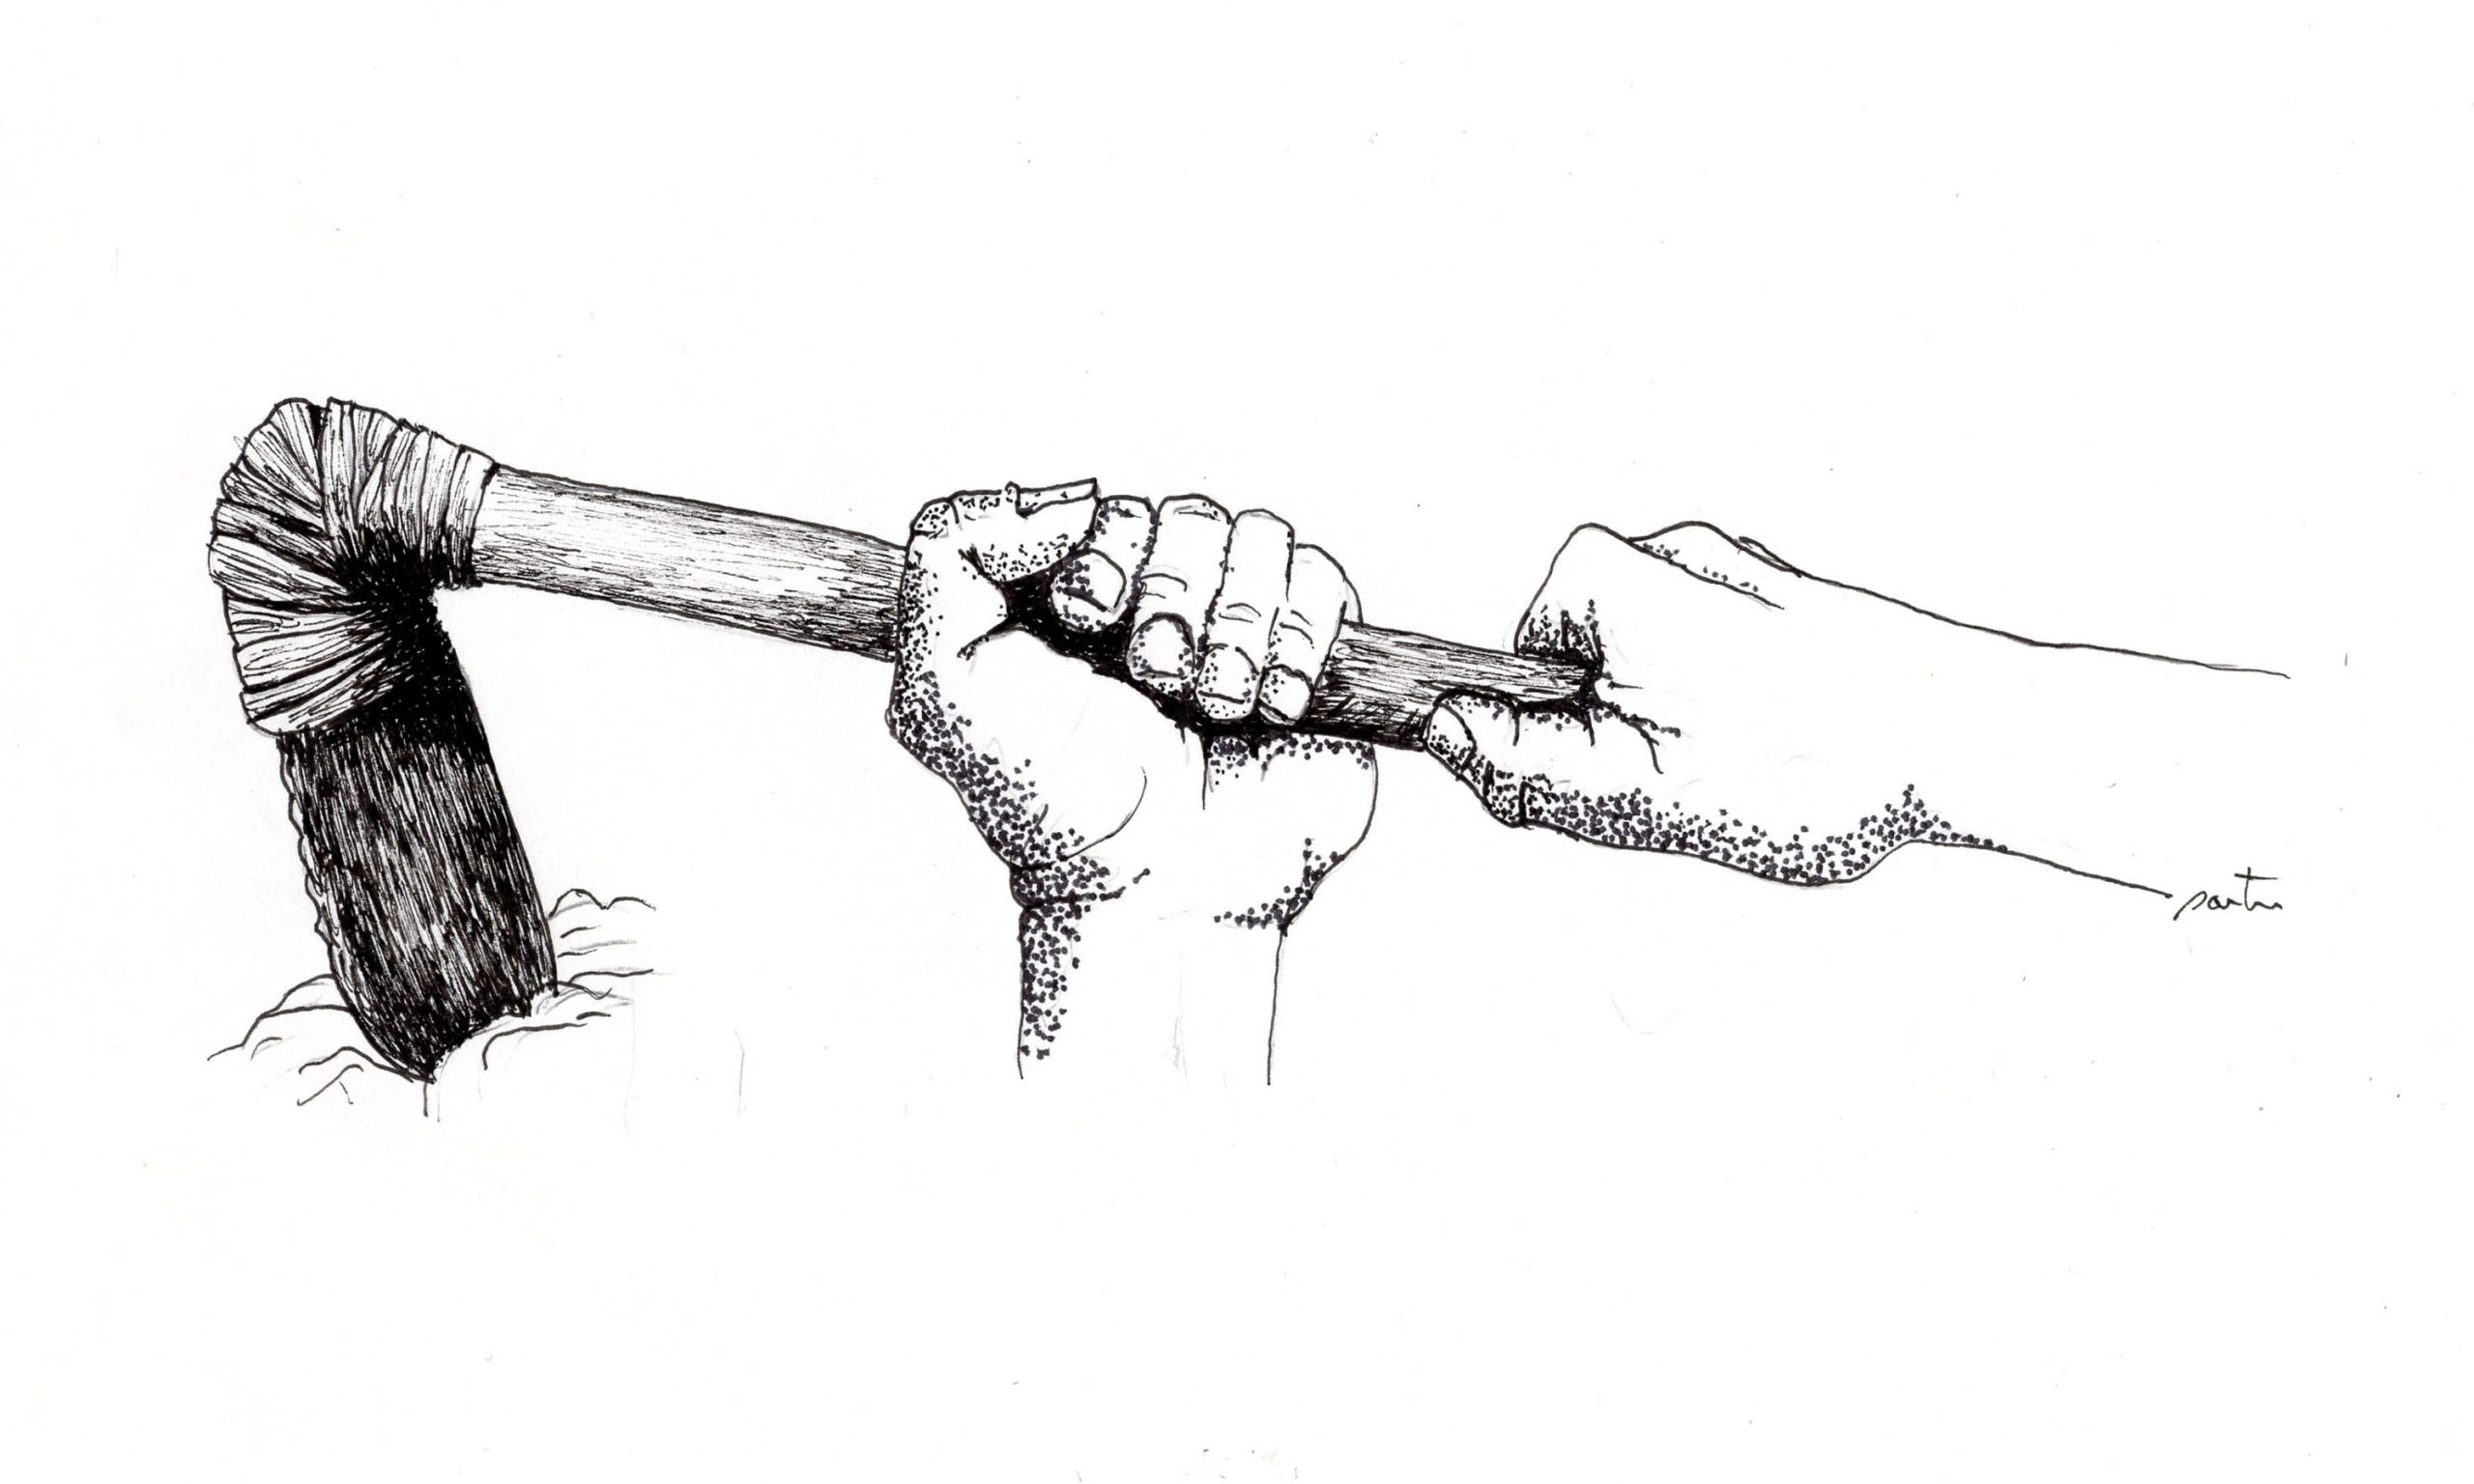 Hands using a tool to break up soil